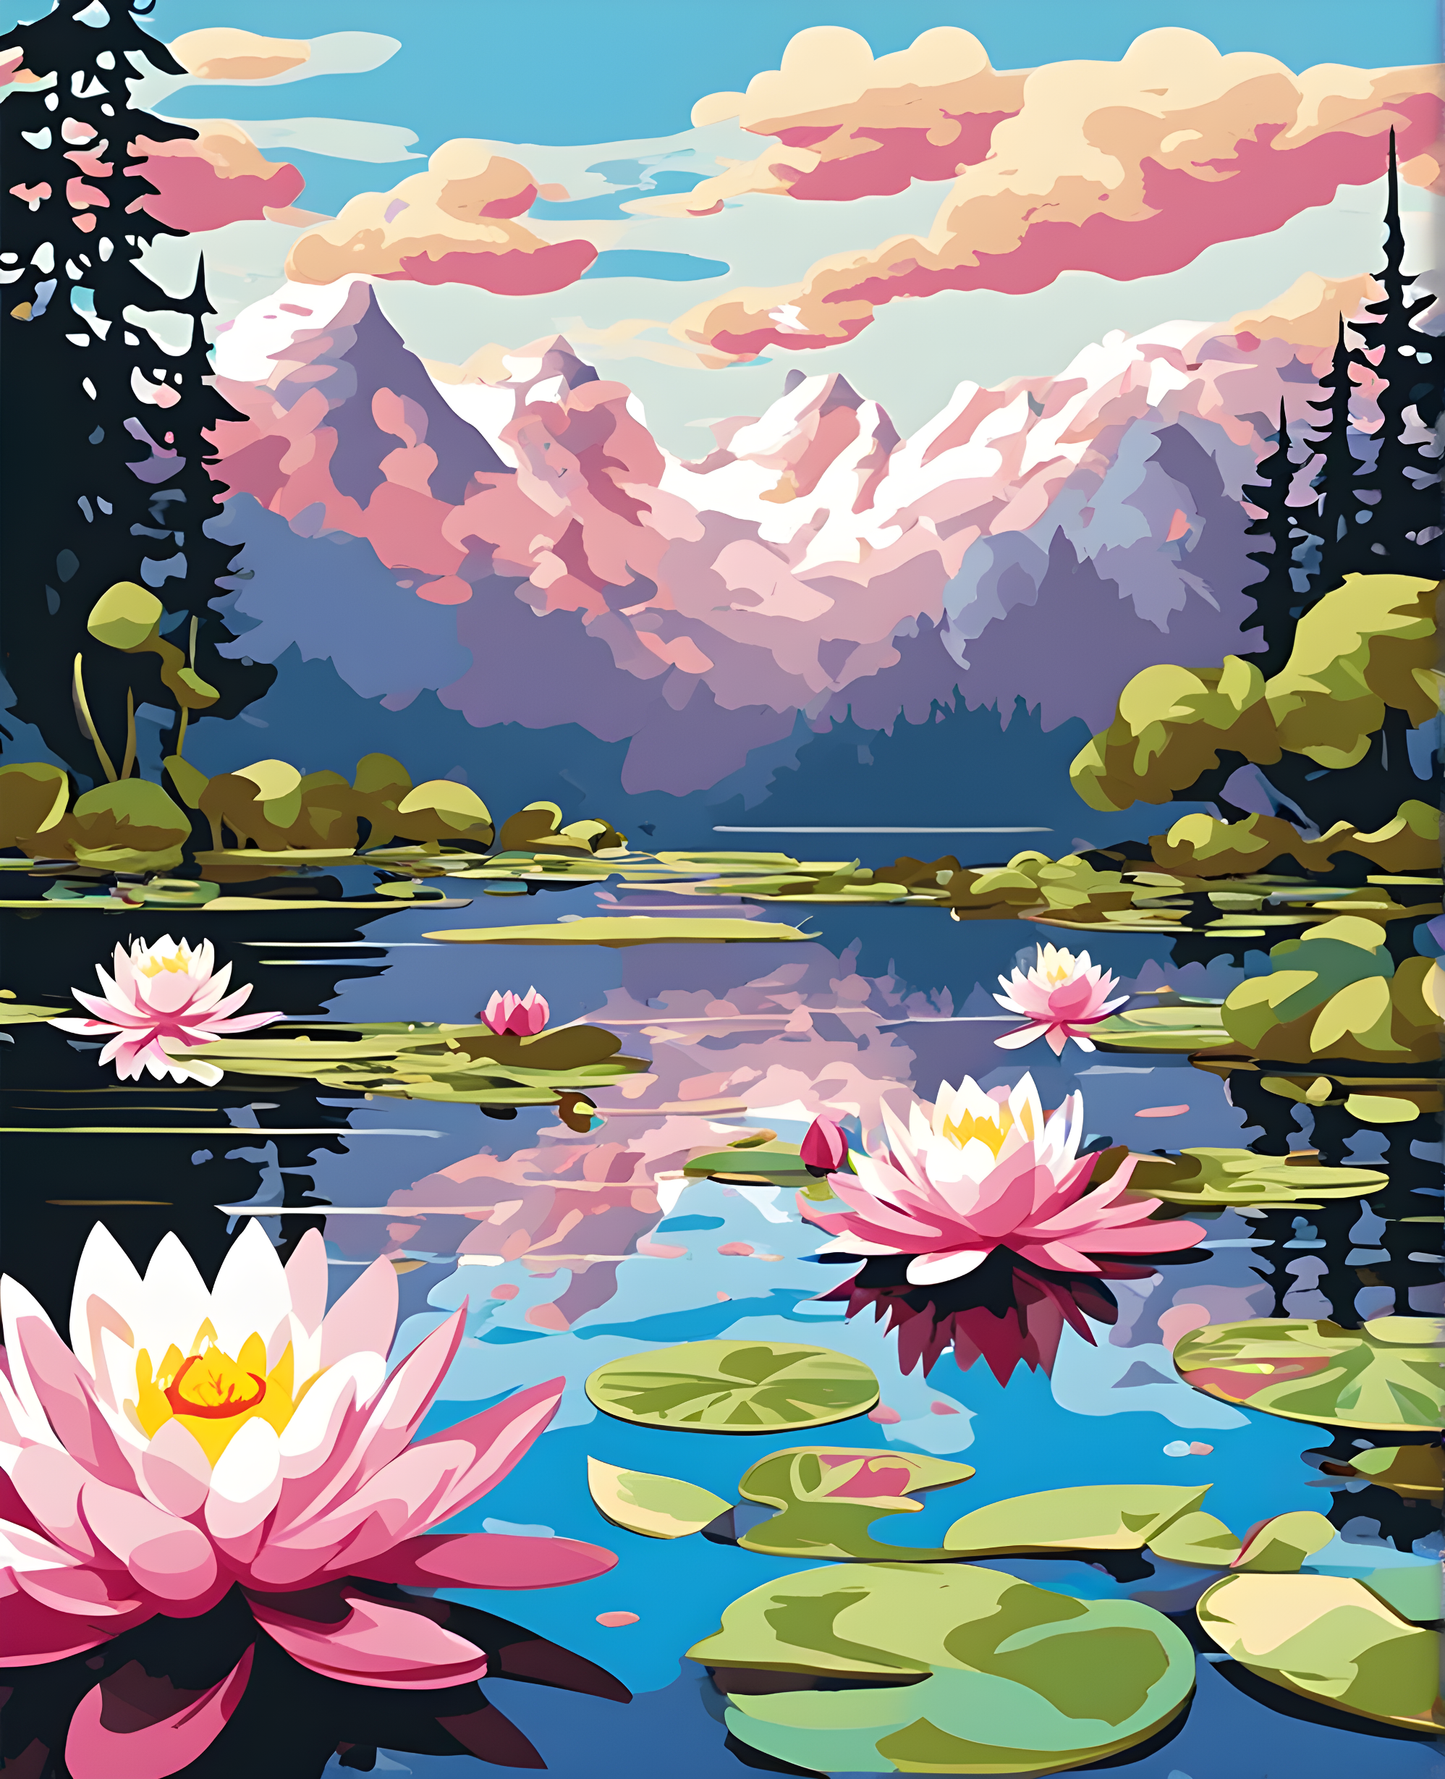 Flowers Collection OD (19) - Water Lily - Van-Go Paint-By-Number Kit